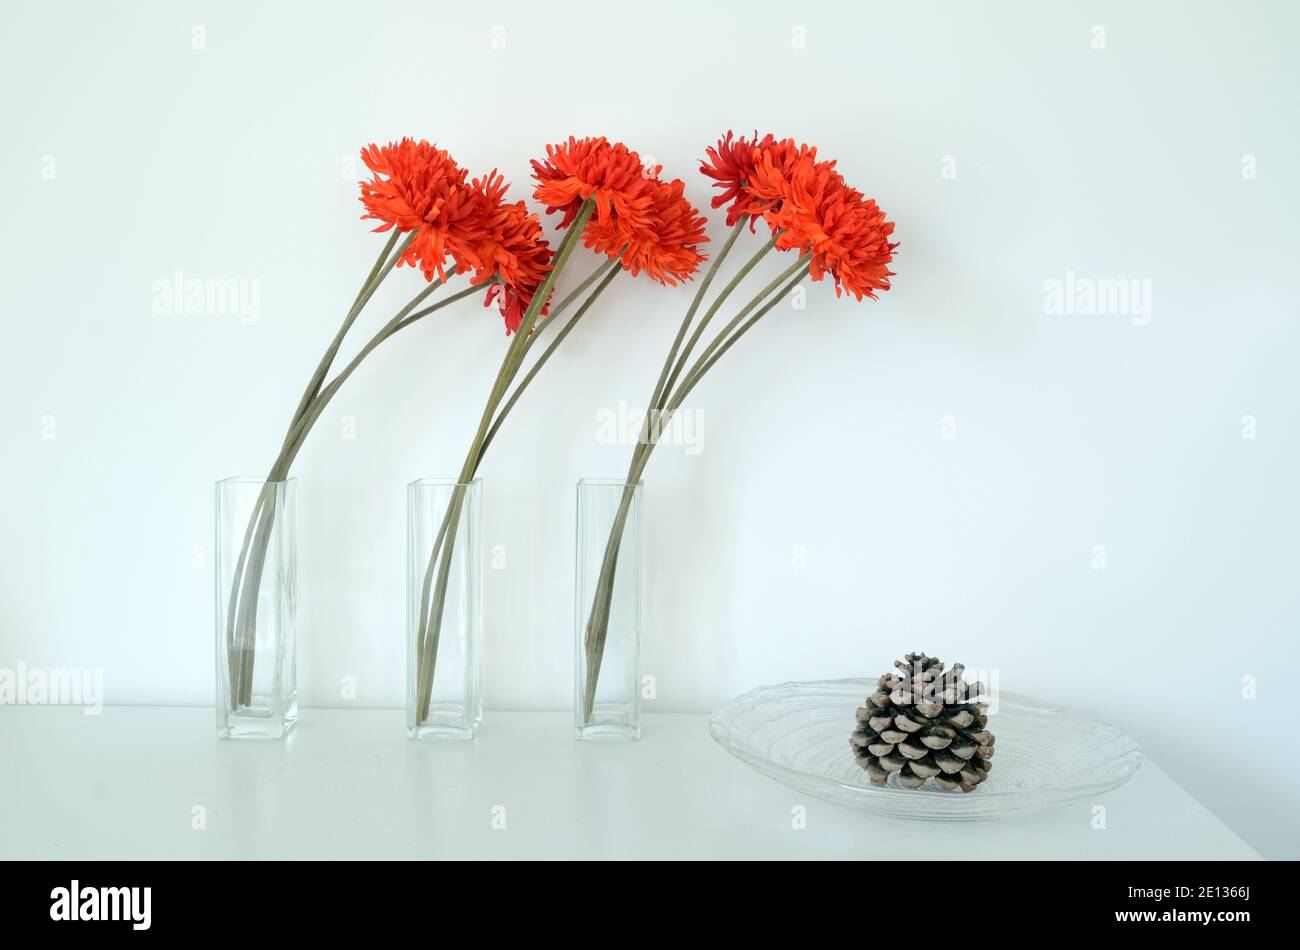 Abstract Still Life with Three Orange-Red Carnations Flowers & Pine Cone in Glass Vases Against White Background Stock Photo